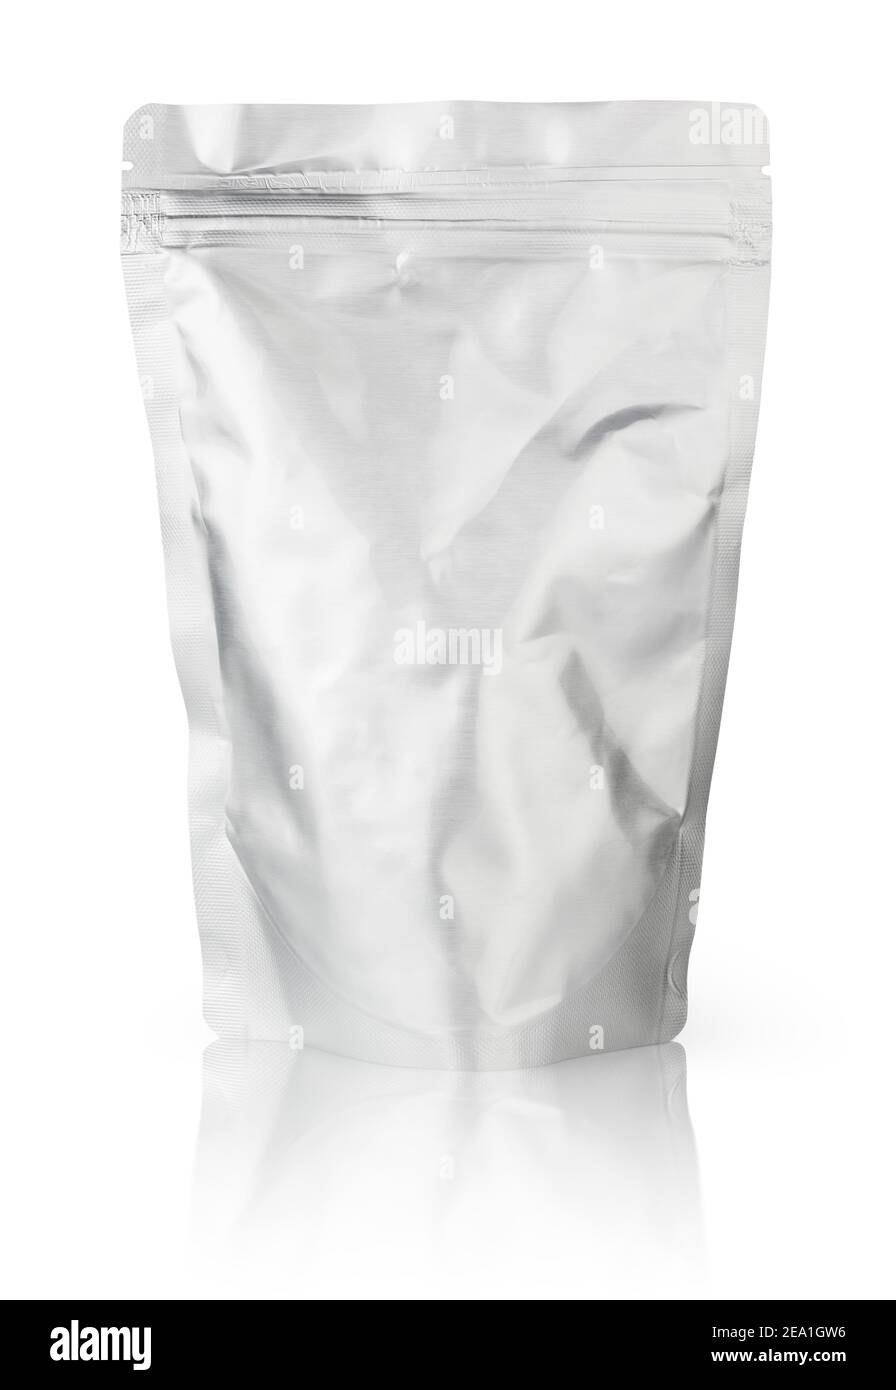 Blank foil plastic pouch food packaging isolated on white background. Single aluminium coffee package bag with clipping path. Stock Photo